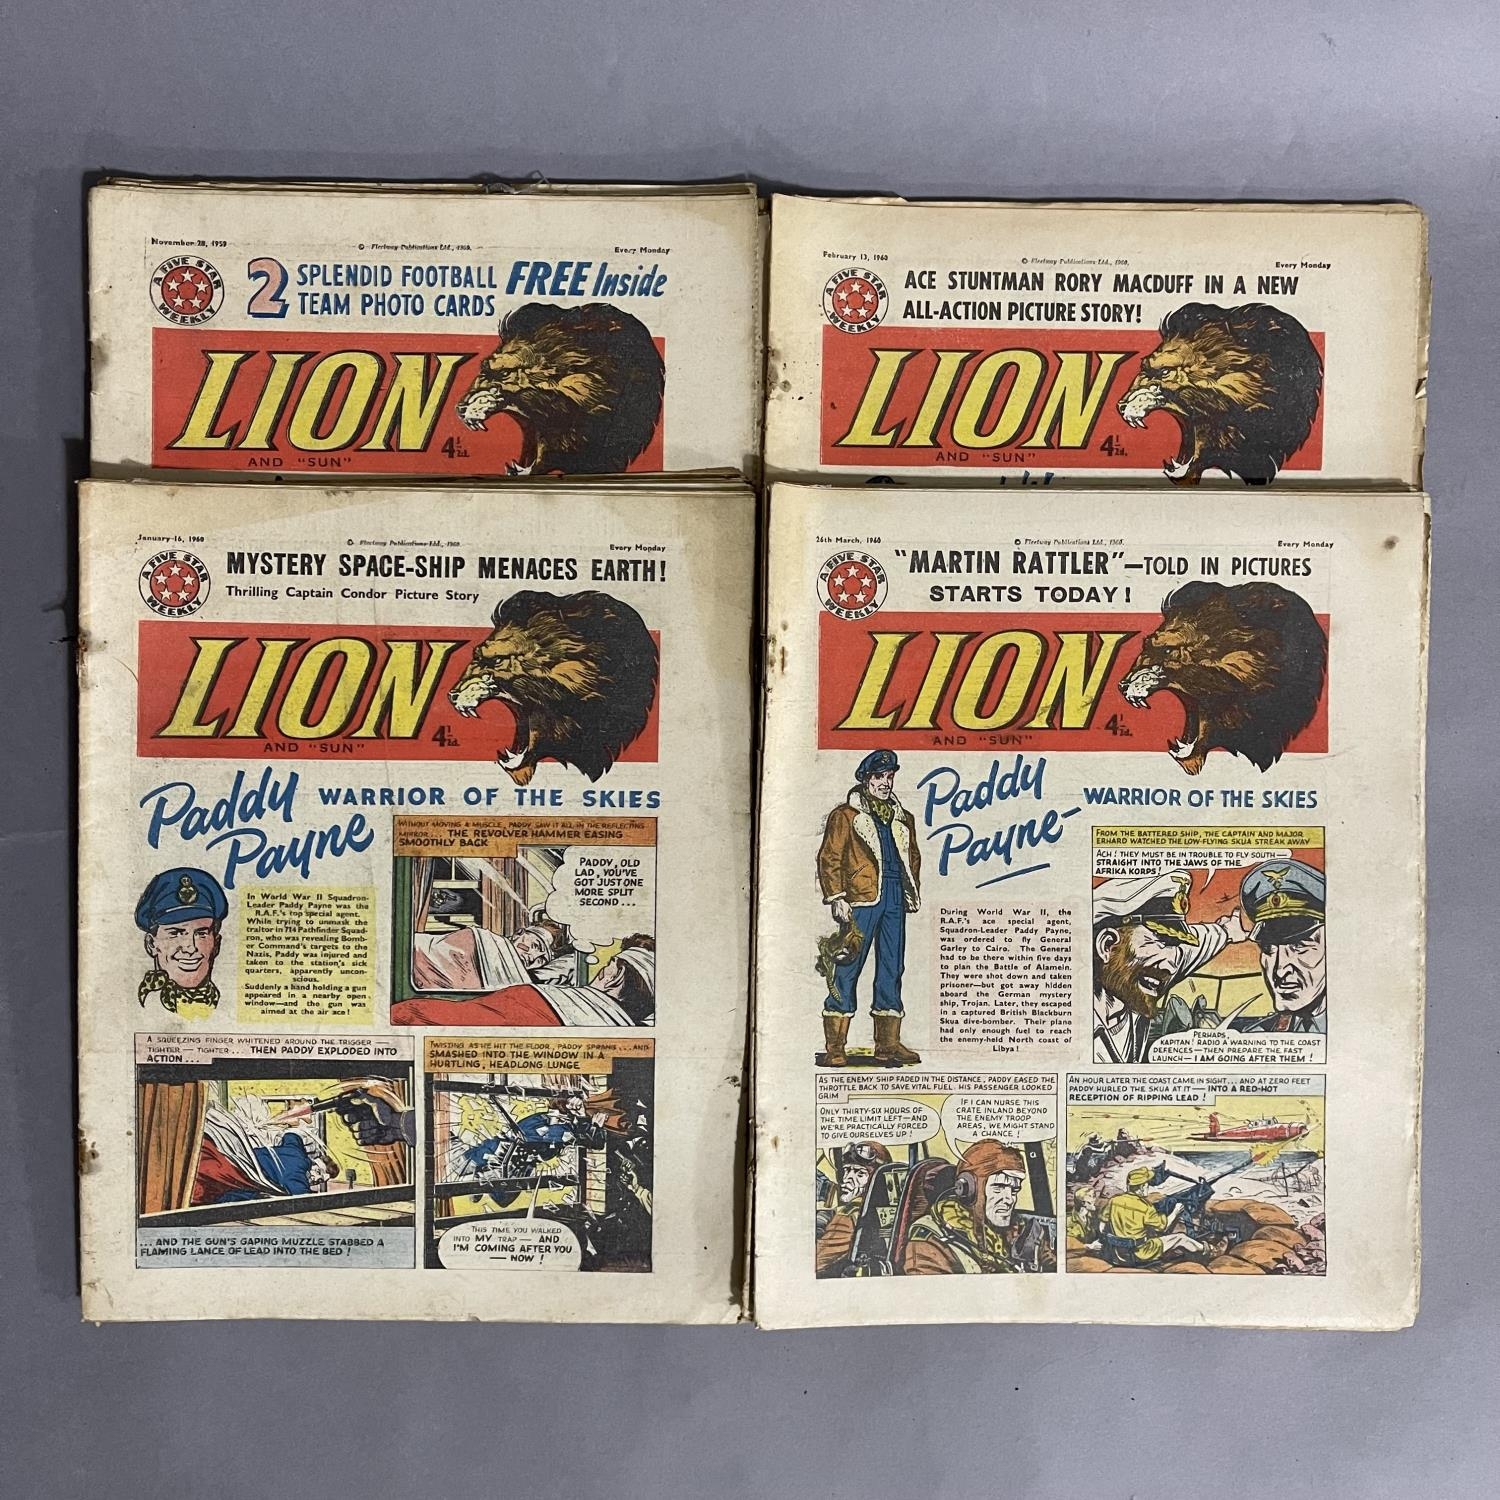 A consecutive collection of 22 early Lion comics dating from October 24th 1959 to 26th March 1960 (